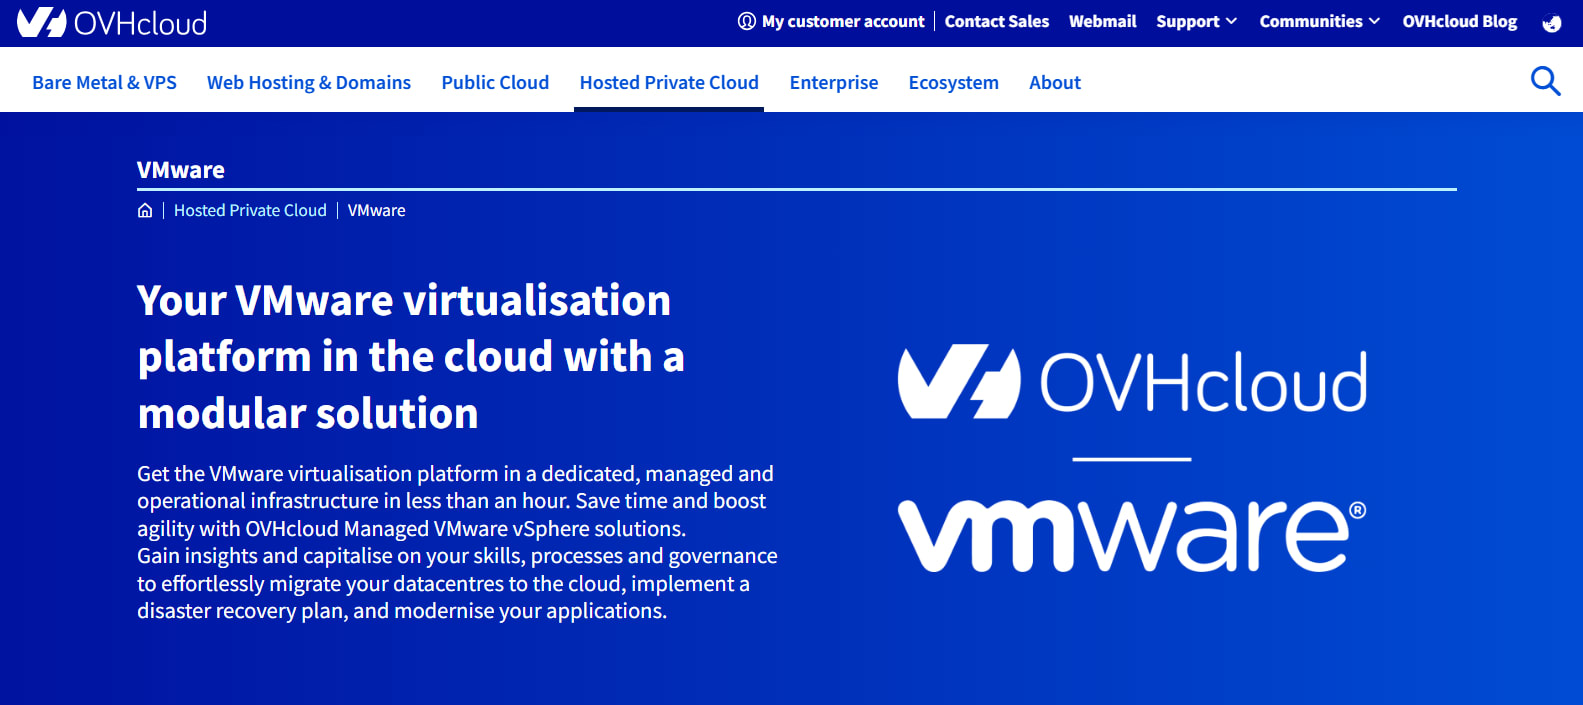 OVHcloud’s hosted private cloud solution.